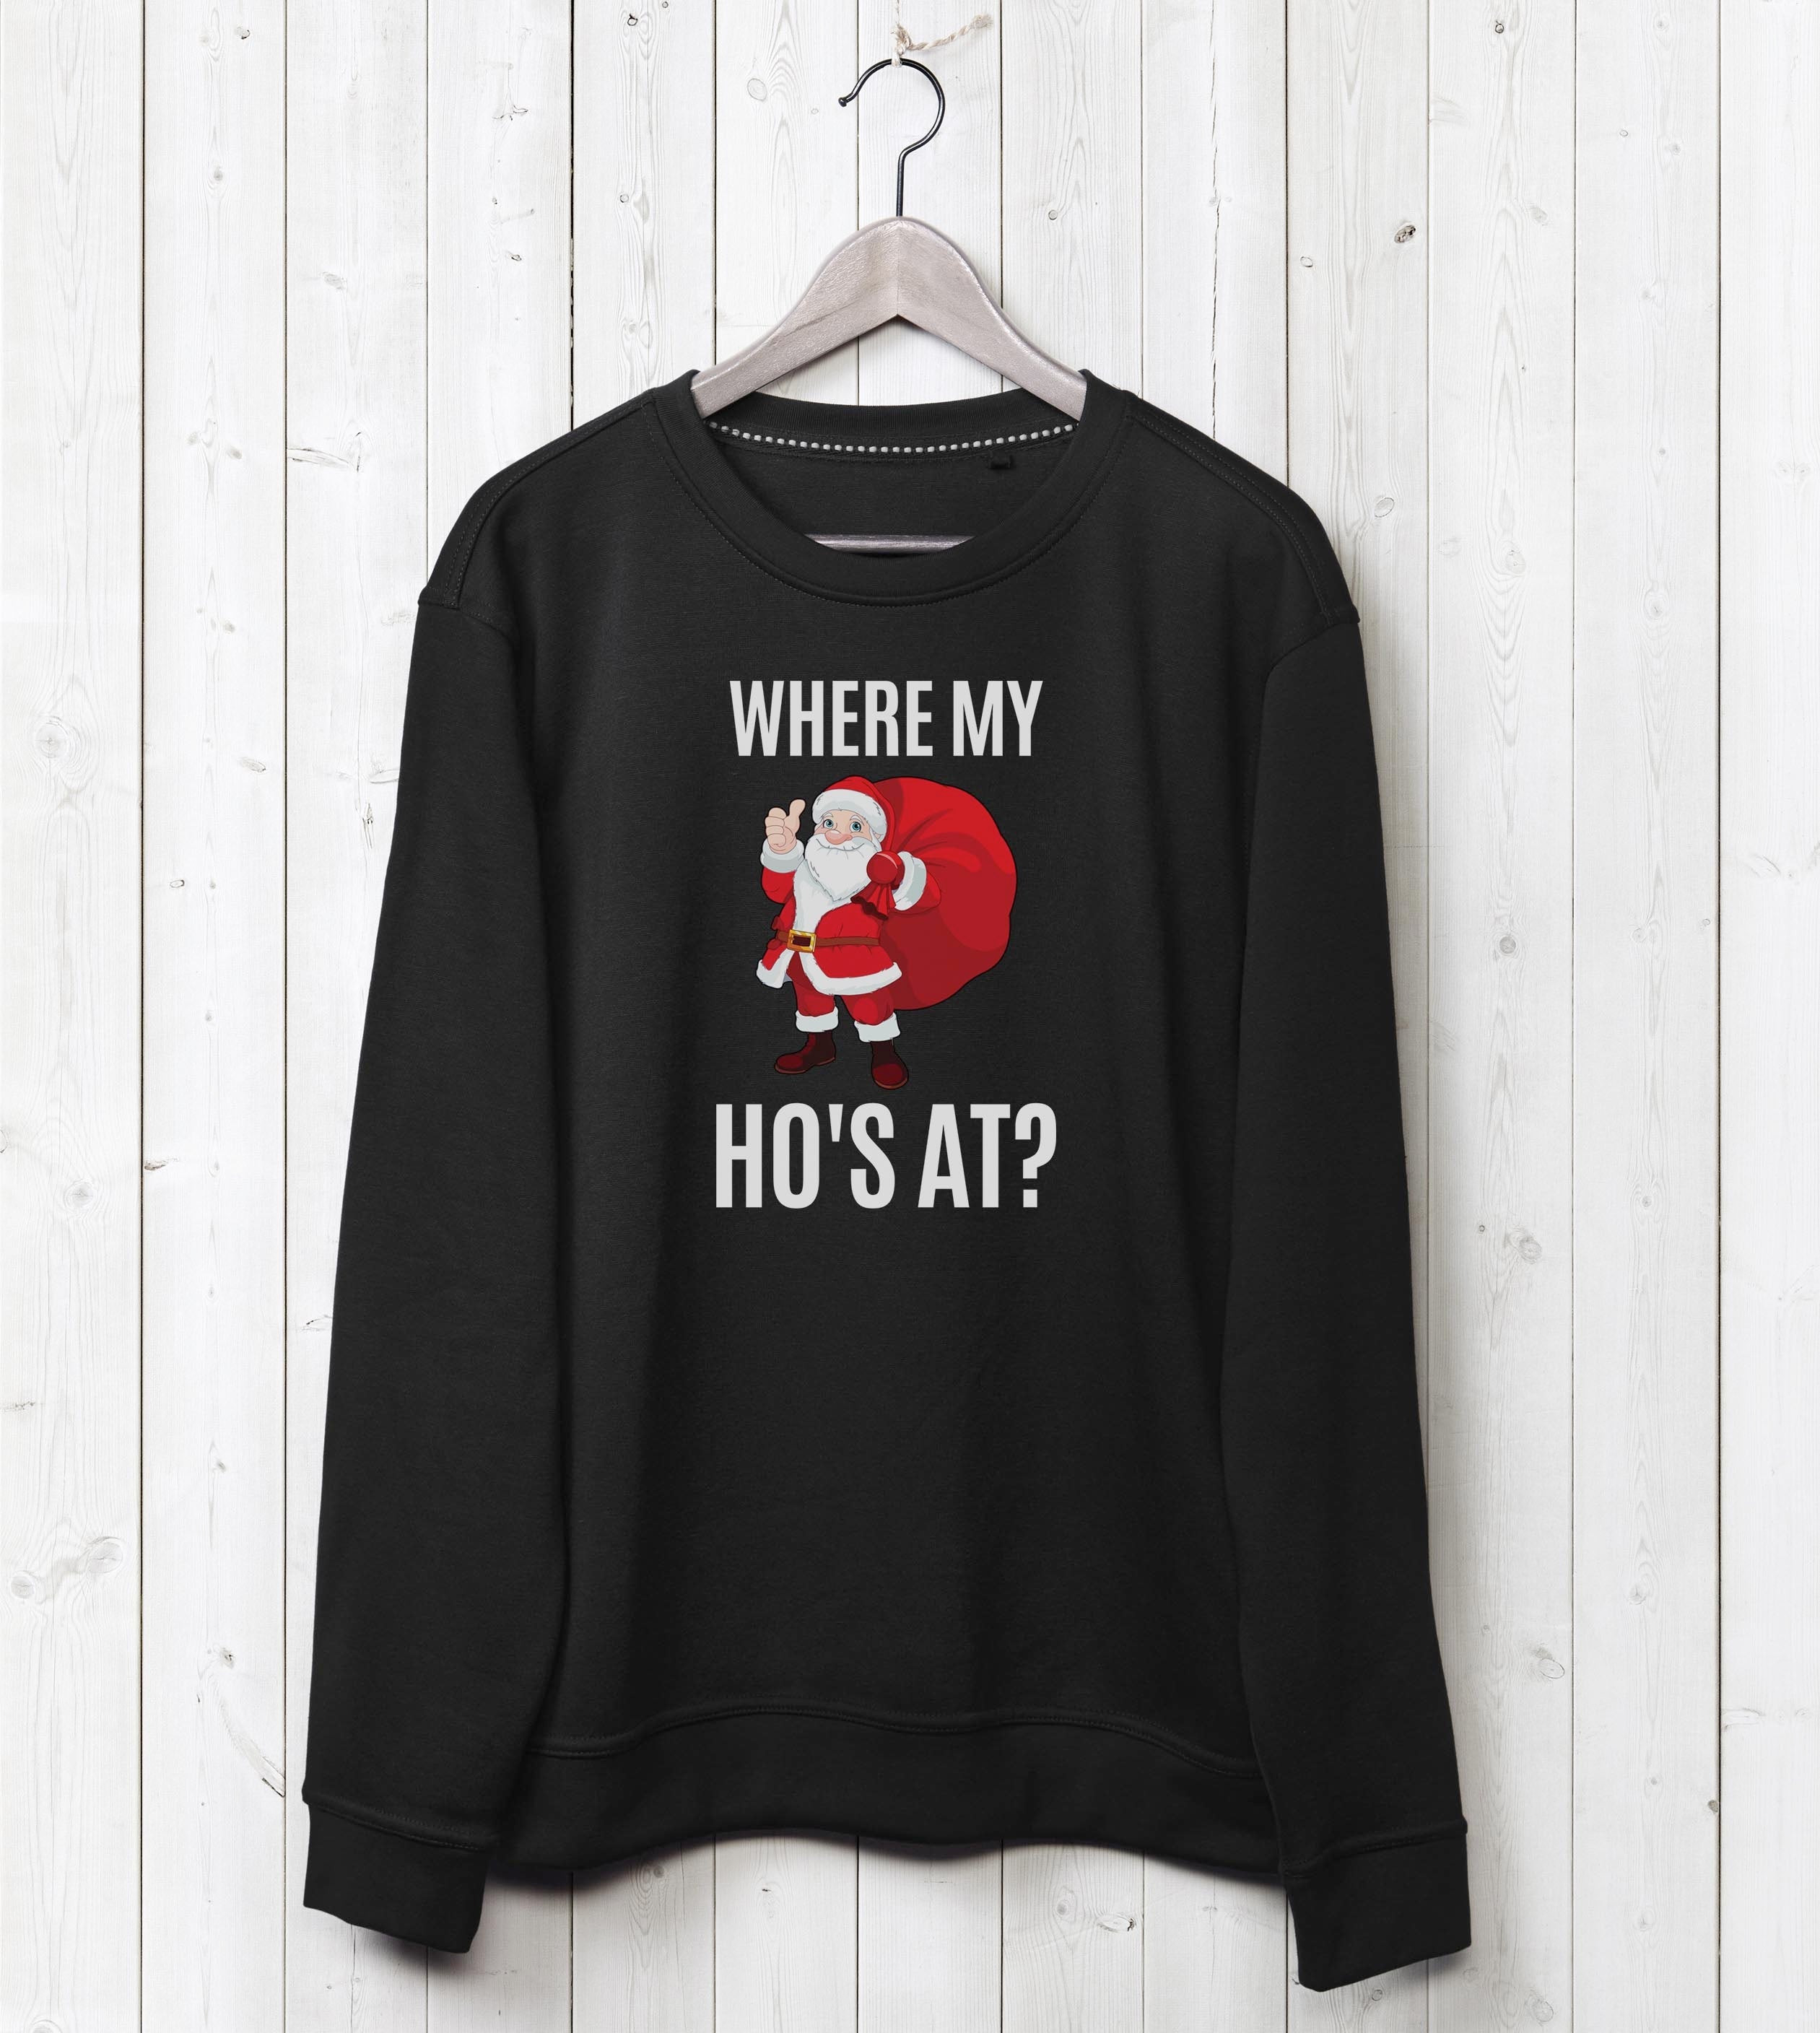 Where My Ho's At? - Sweater